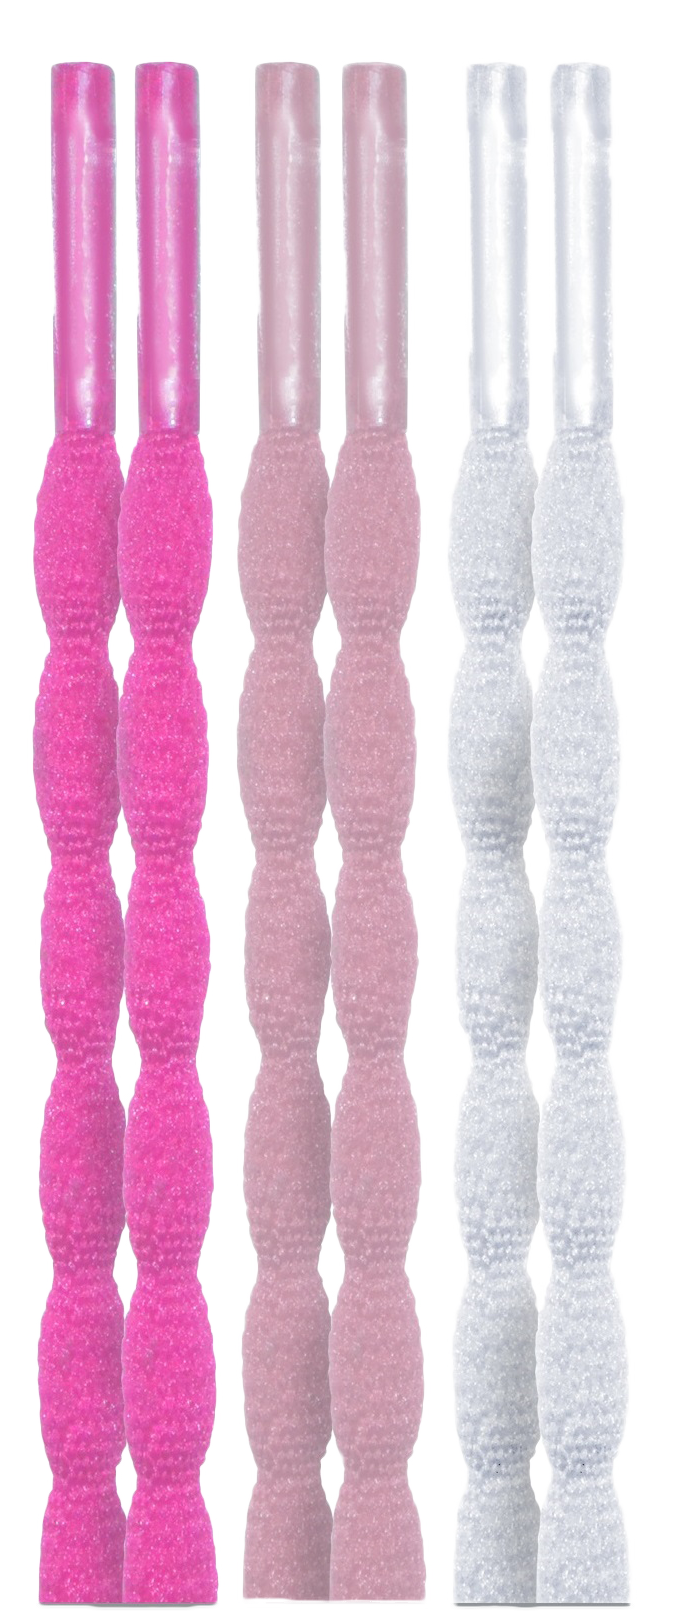 10 Seconds ® Athletic Bubble Laces | Neon Pink/Light Pink/White - 3 Pack